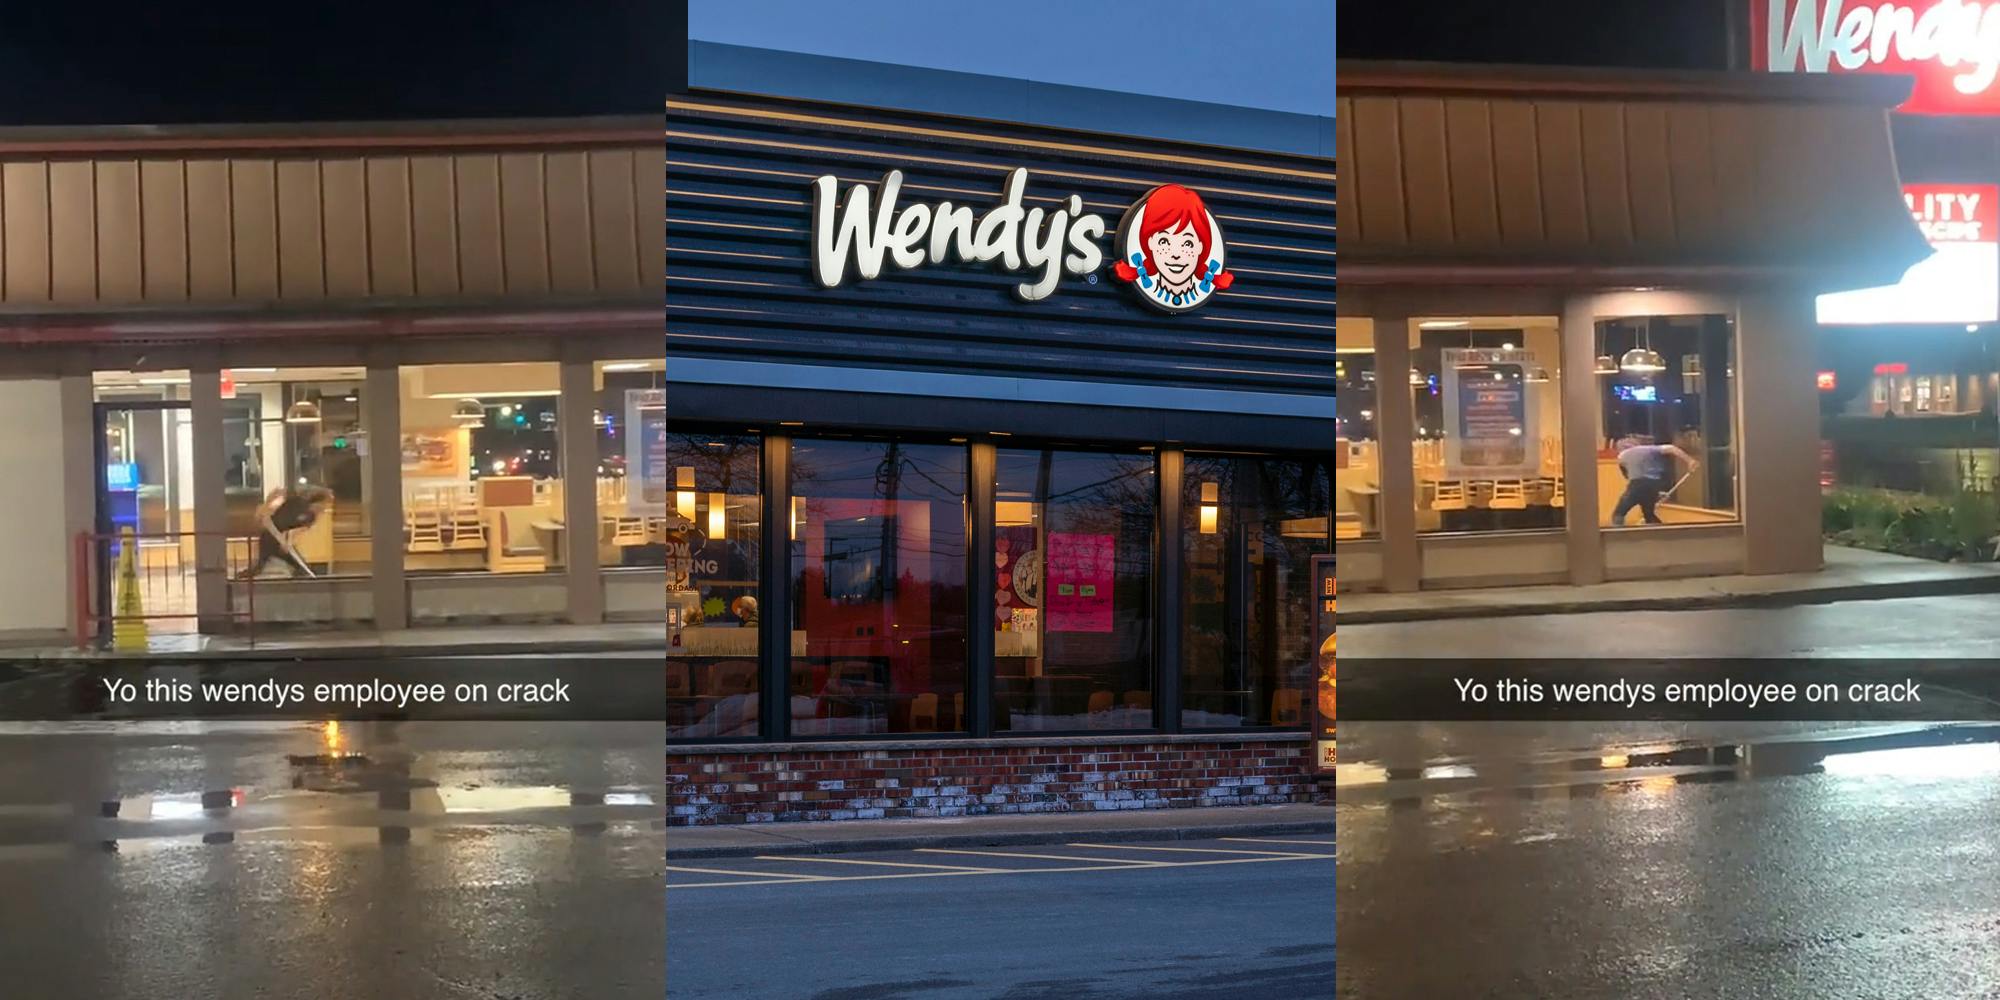 Wendy's worker speed mopping the store with caption "Yo this wendys employee on crack" (l) Wendy's building with sign at night (c) Wendy's worker speed mopping the store with caption "Yo this wendys employee on crack" (r)